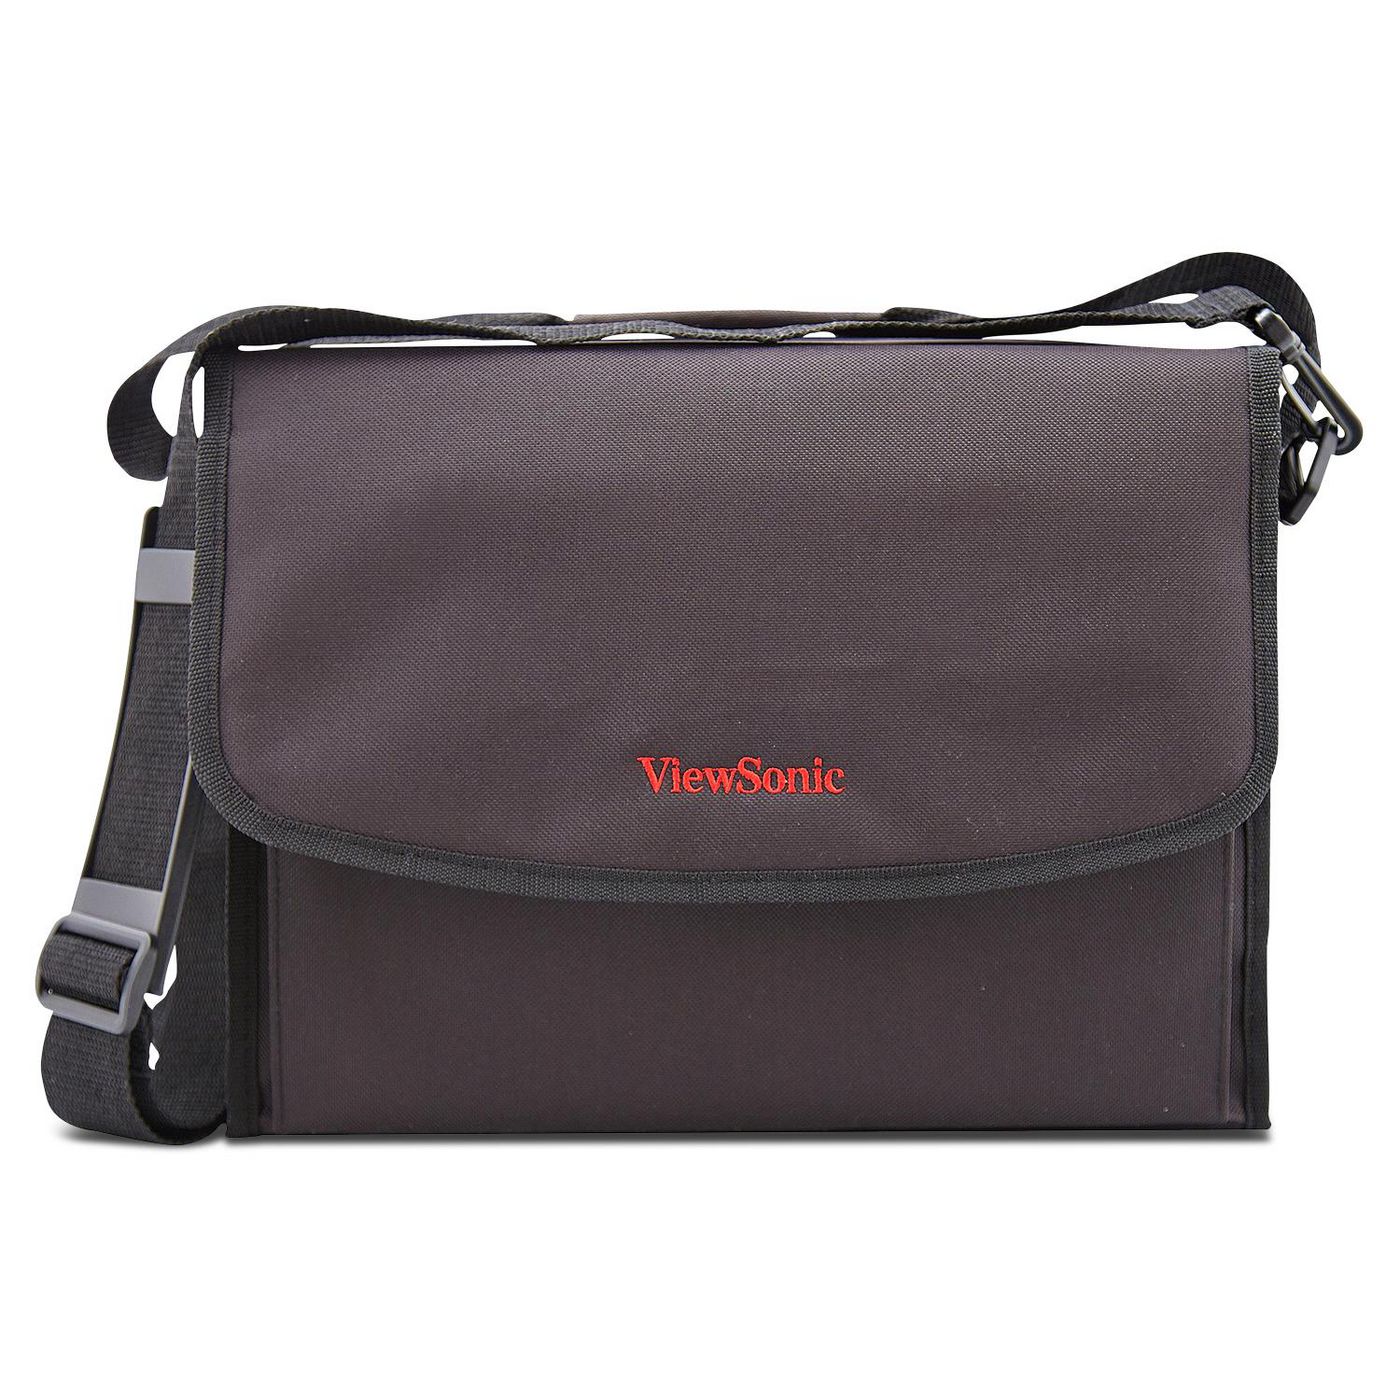 ViewSonic PJ-CASE-008 - Projector Carry 